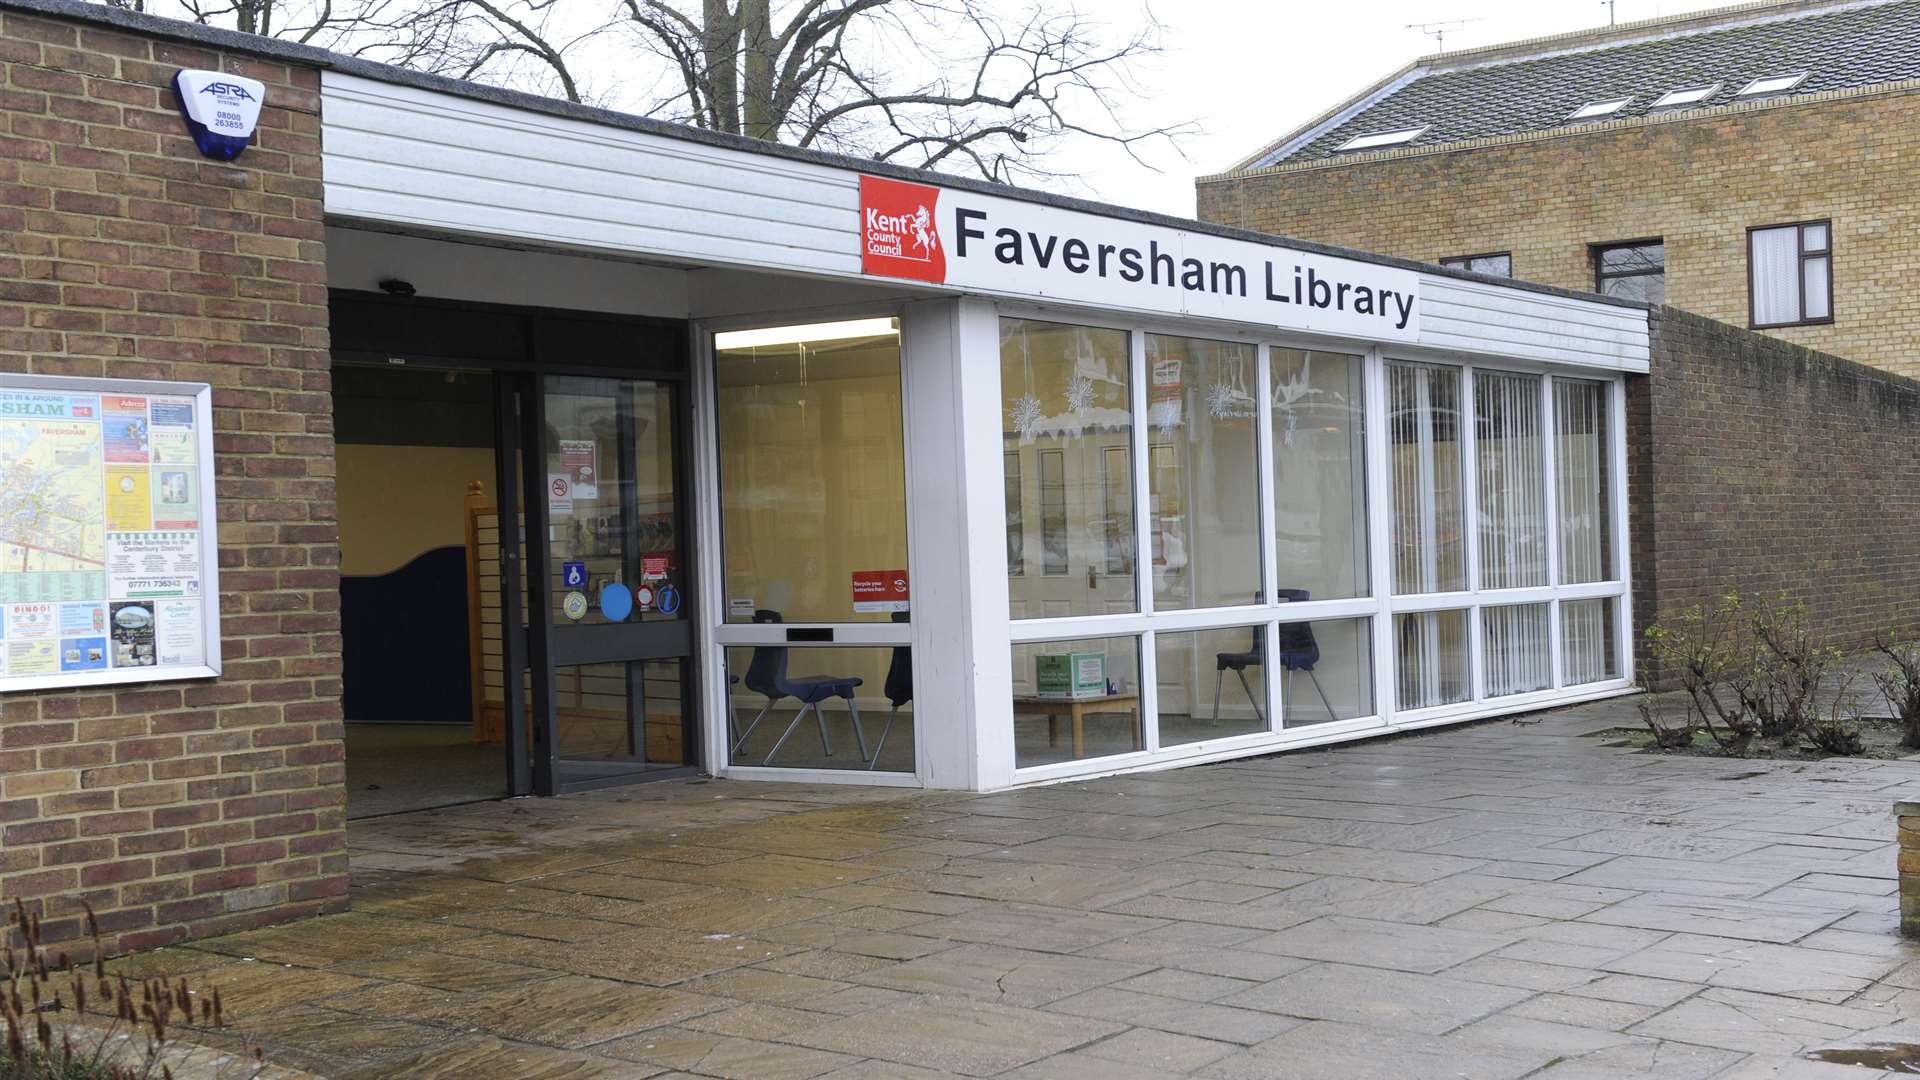 The nearest libraries people can visit are in Teynham, Faversham (pictured), Boughton, Sheerness, Minster and Queenborough